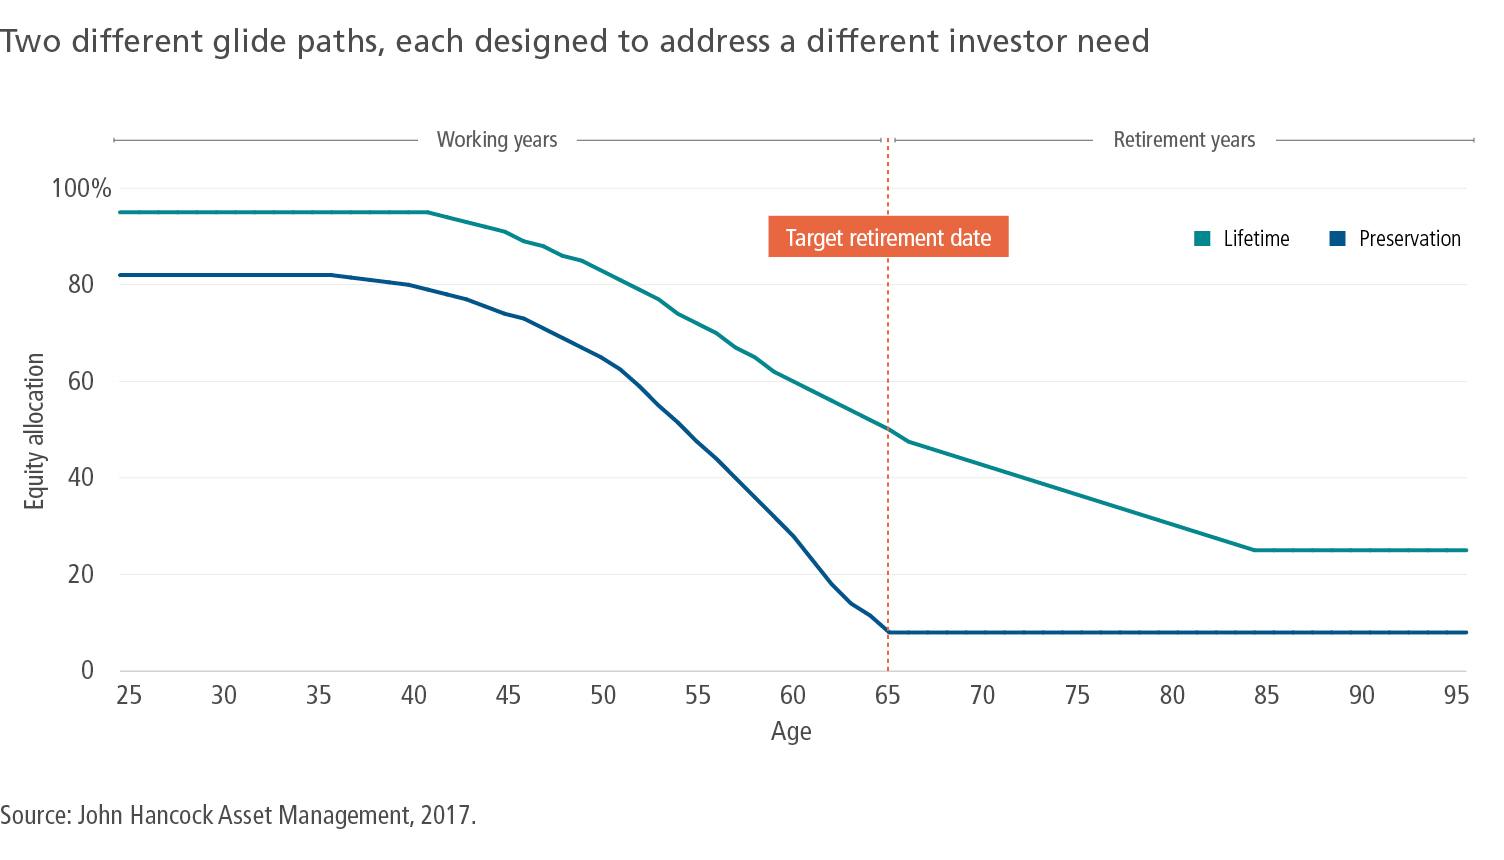 Two different glide paths, each designed to address a different investor need